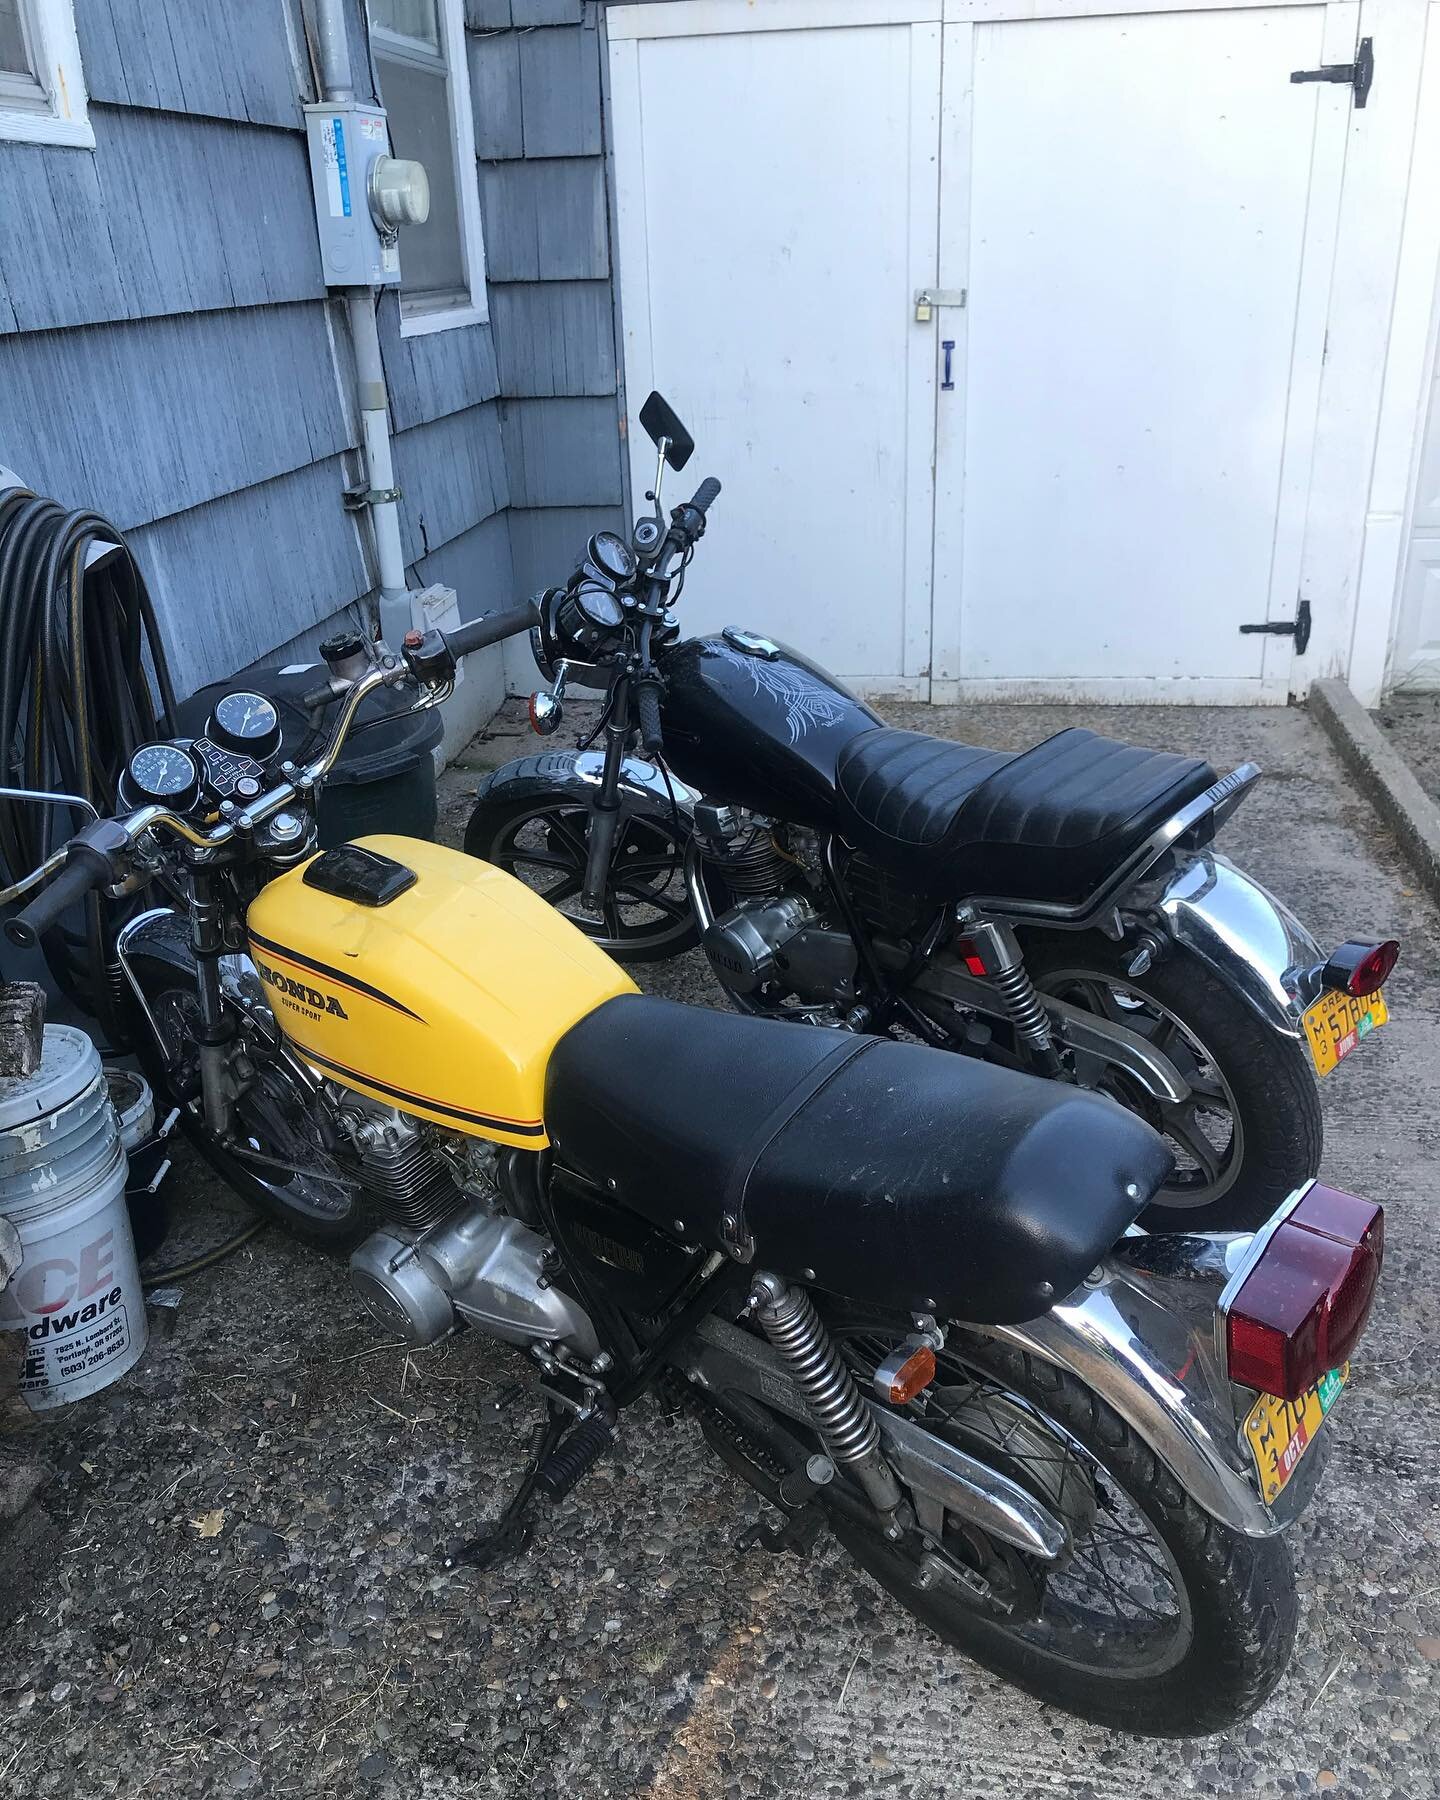 FOUND! If you want to support a good cause, give @guardiansportland your money!!!
.
.
.
STOLEN! Please Boost!
Bright yellow, 1977 CB400F. License plate M370477. 

Please contact directly with any info!